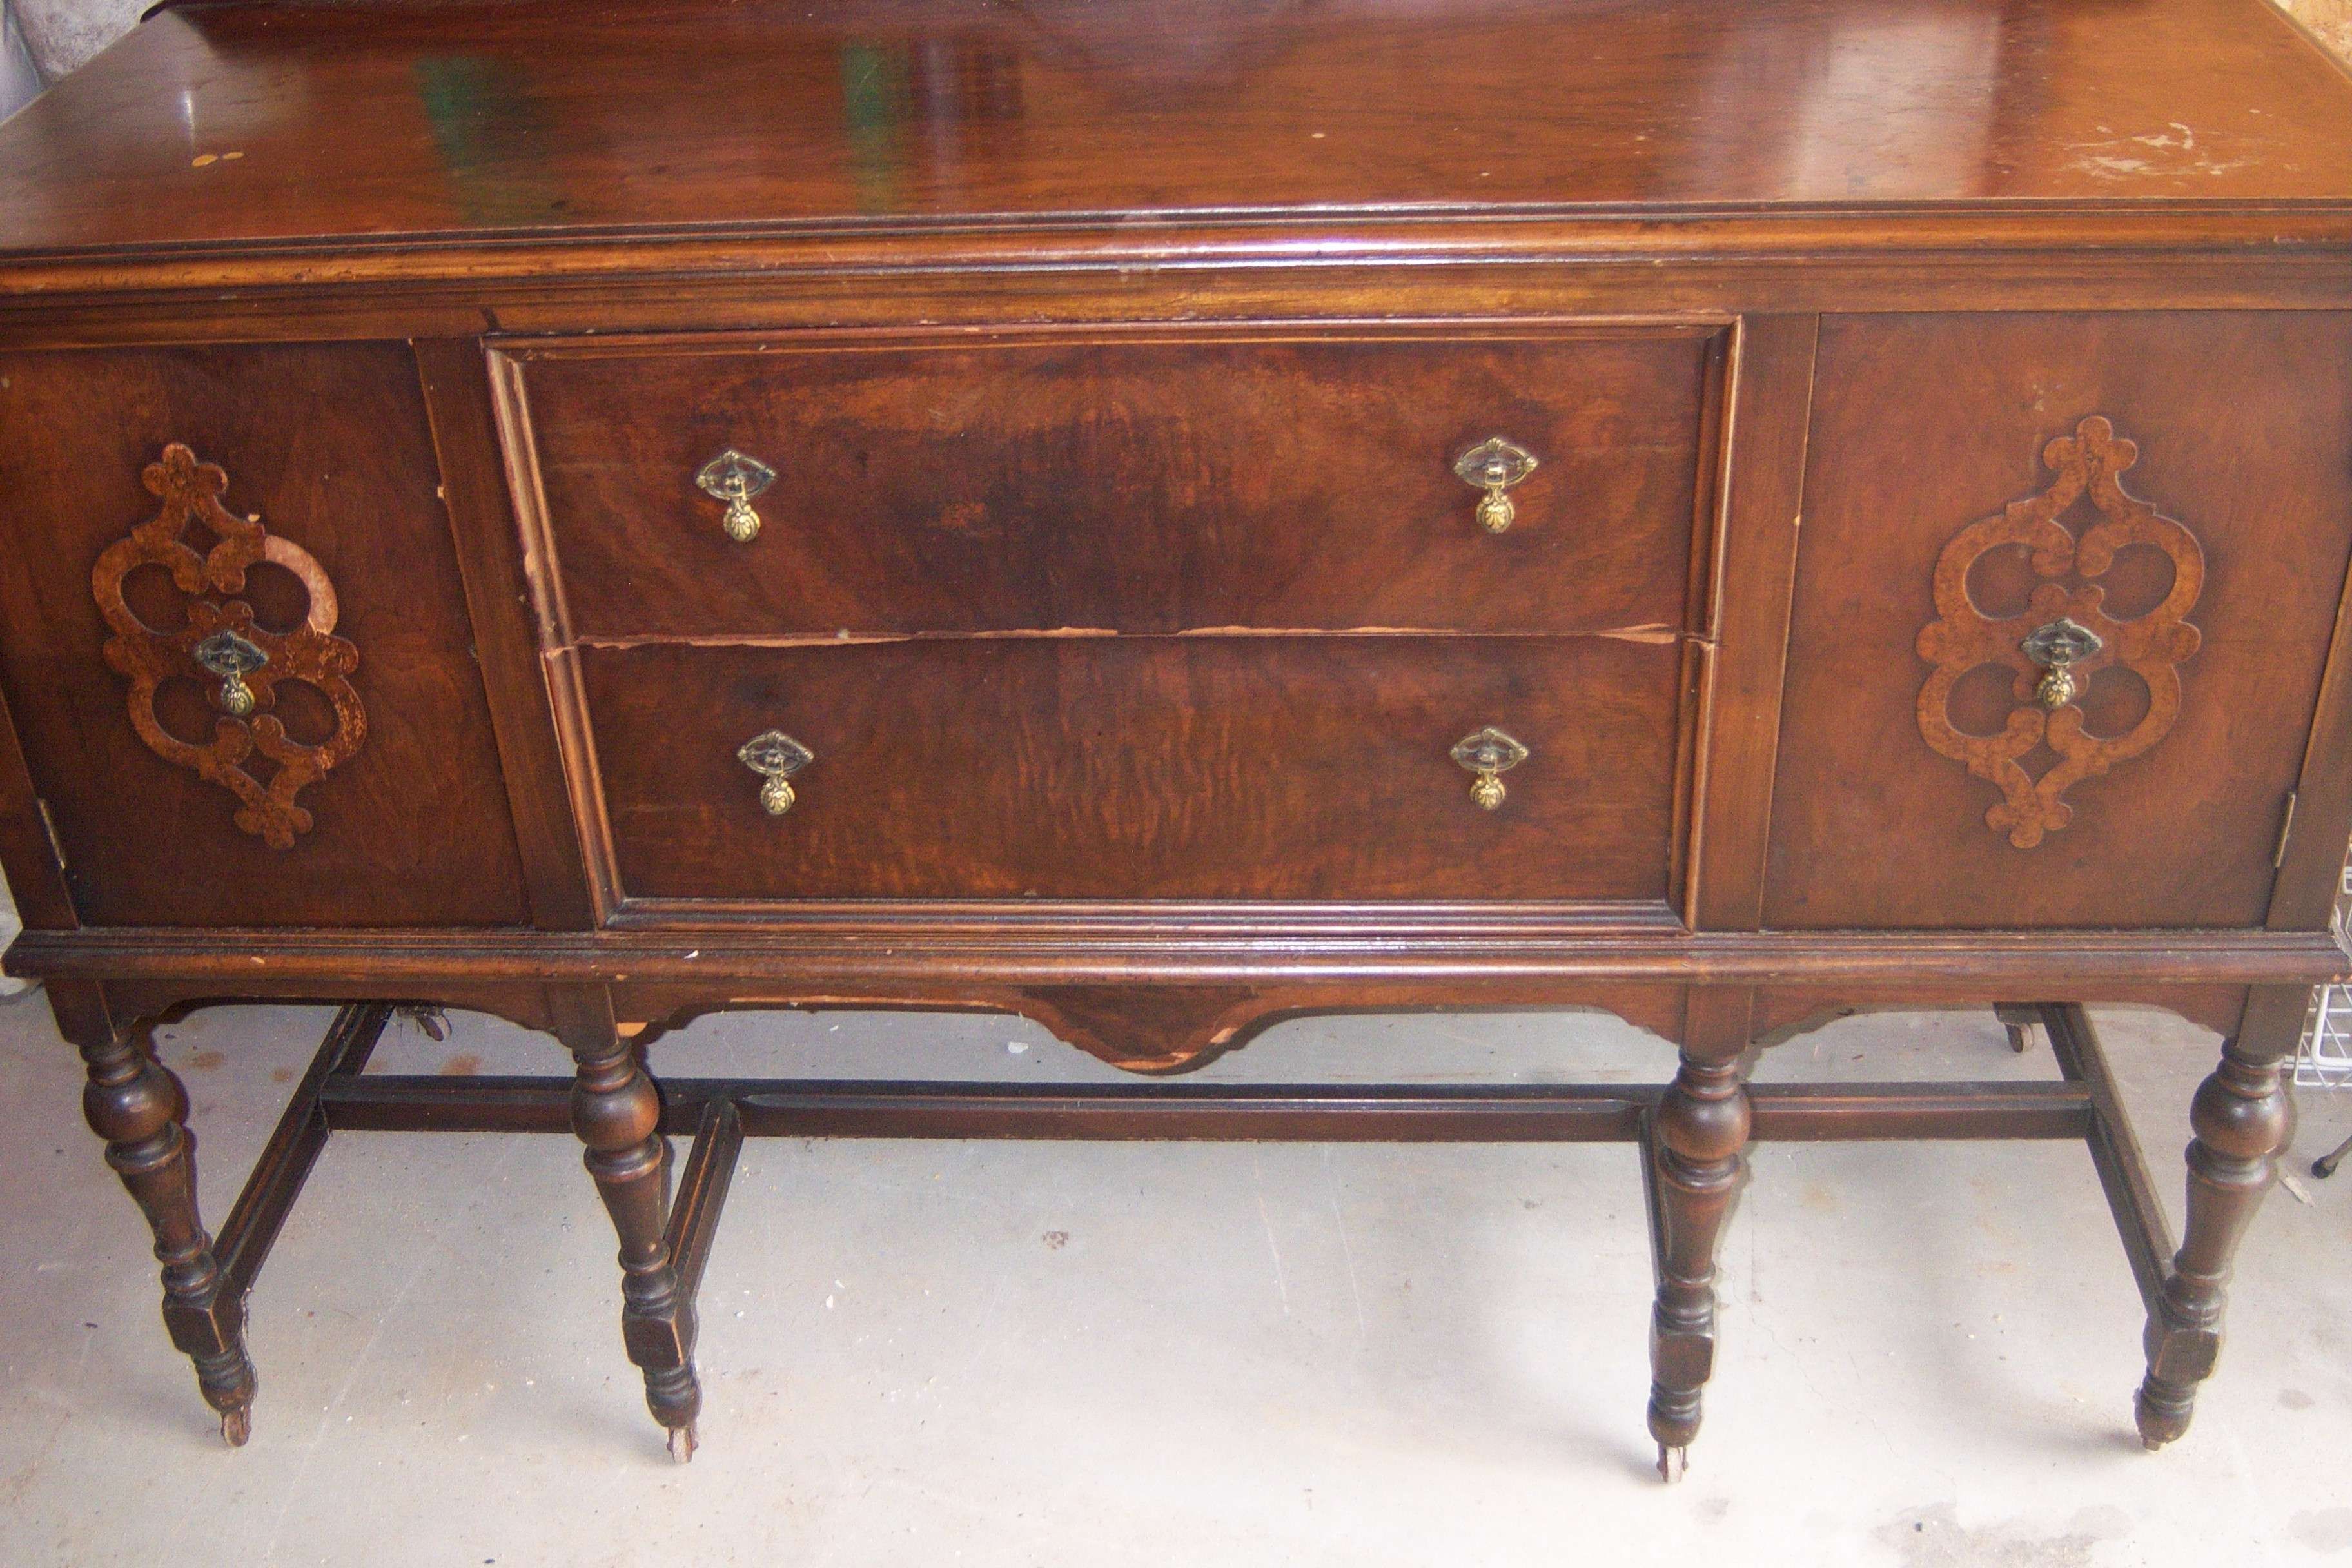 Beautiful Antique Sideboards And Buffets – Bjdgjy Within Antique Sideboards And Buffets (View 1 of 20)